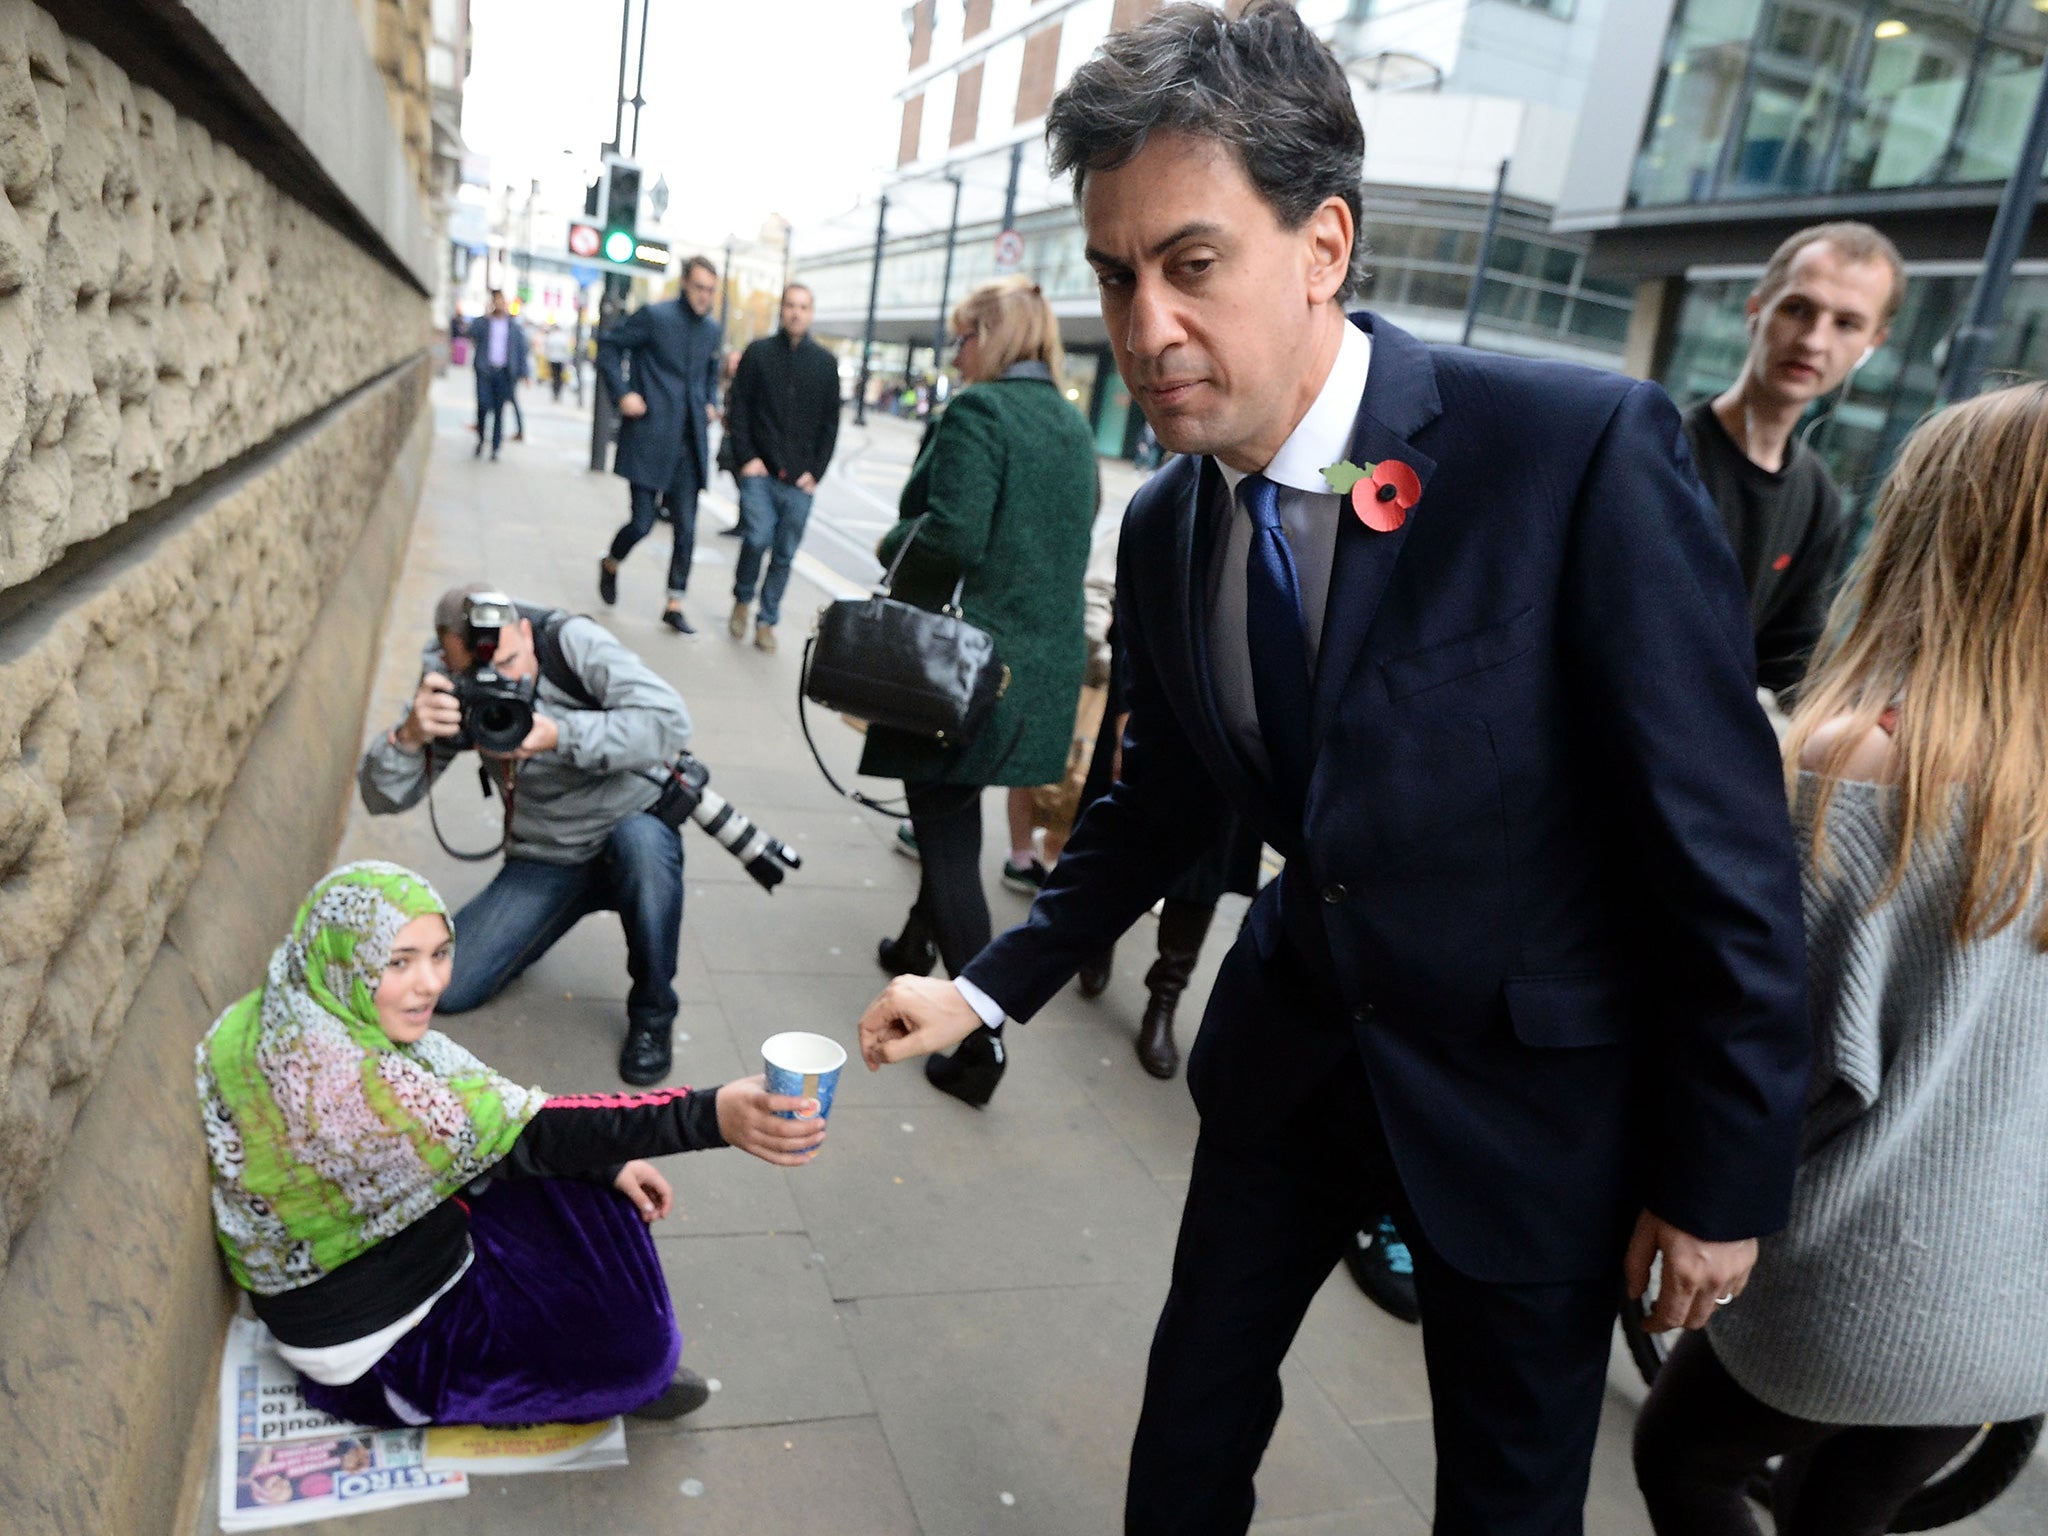 The episode with a beggar illustrated how Miliband can't win with the media